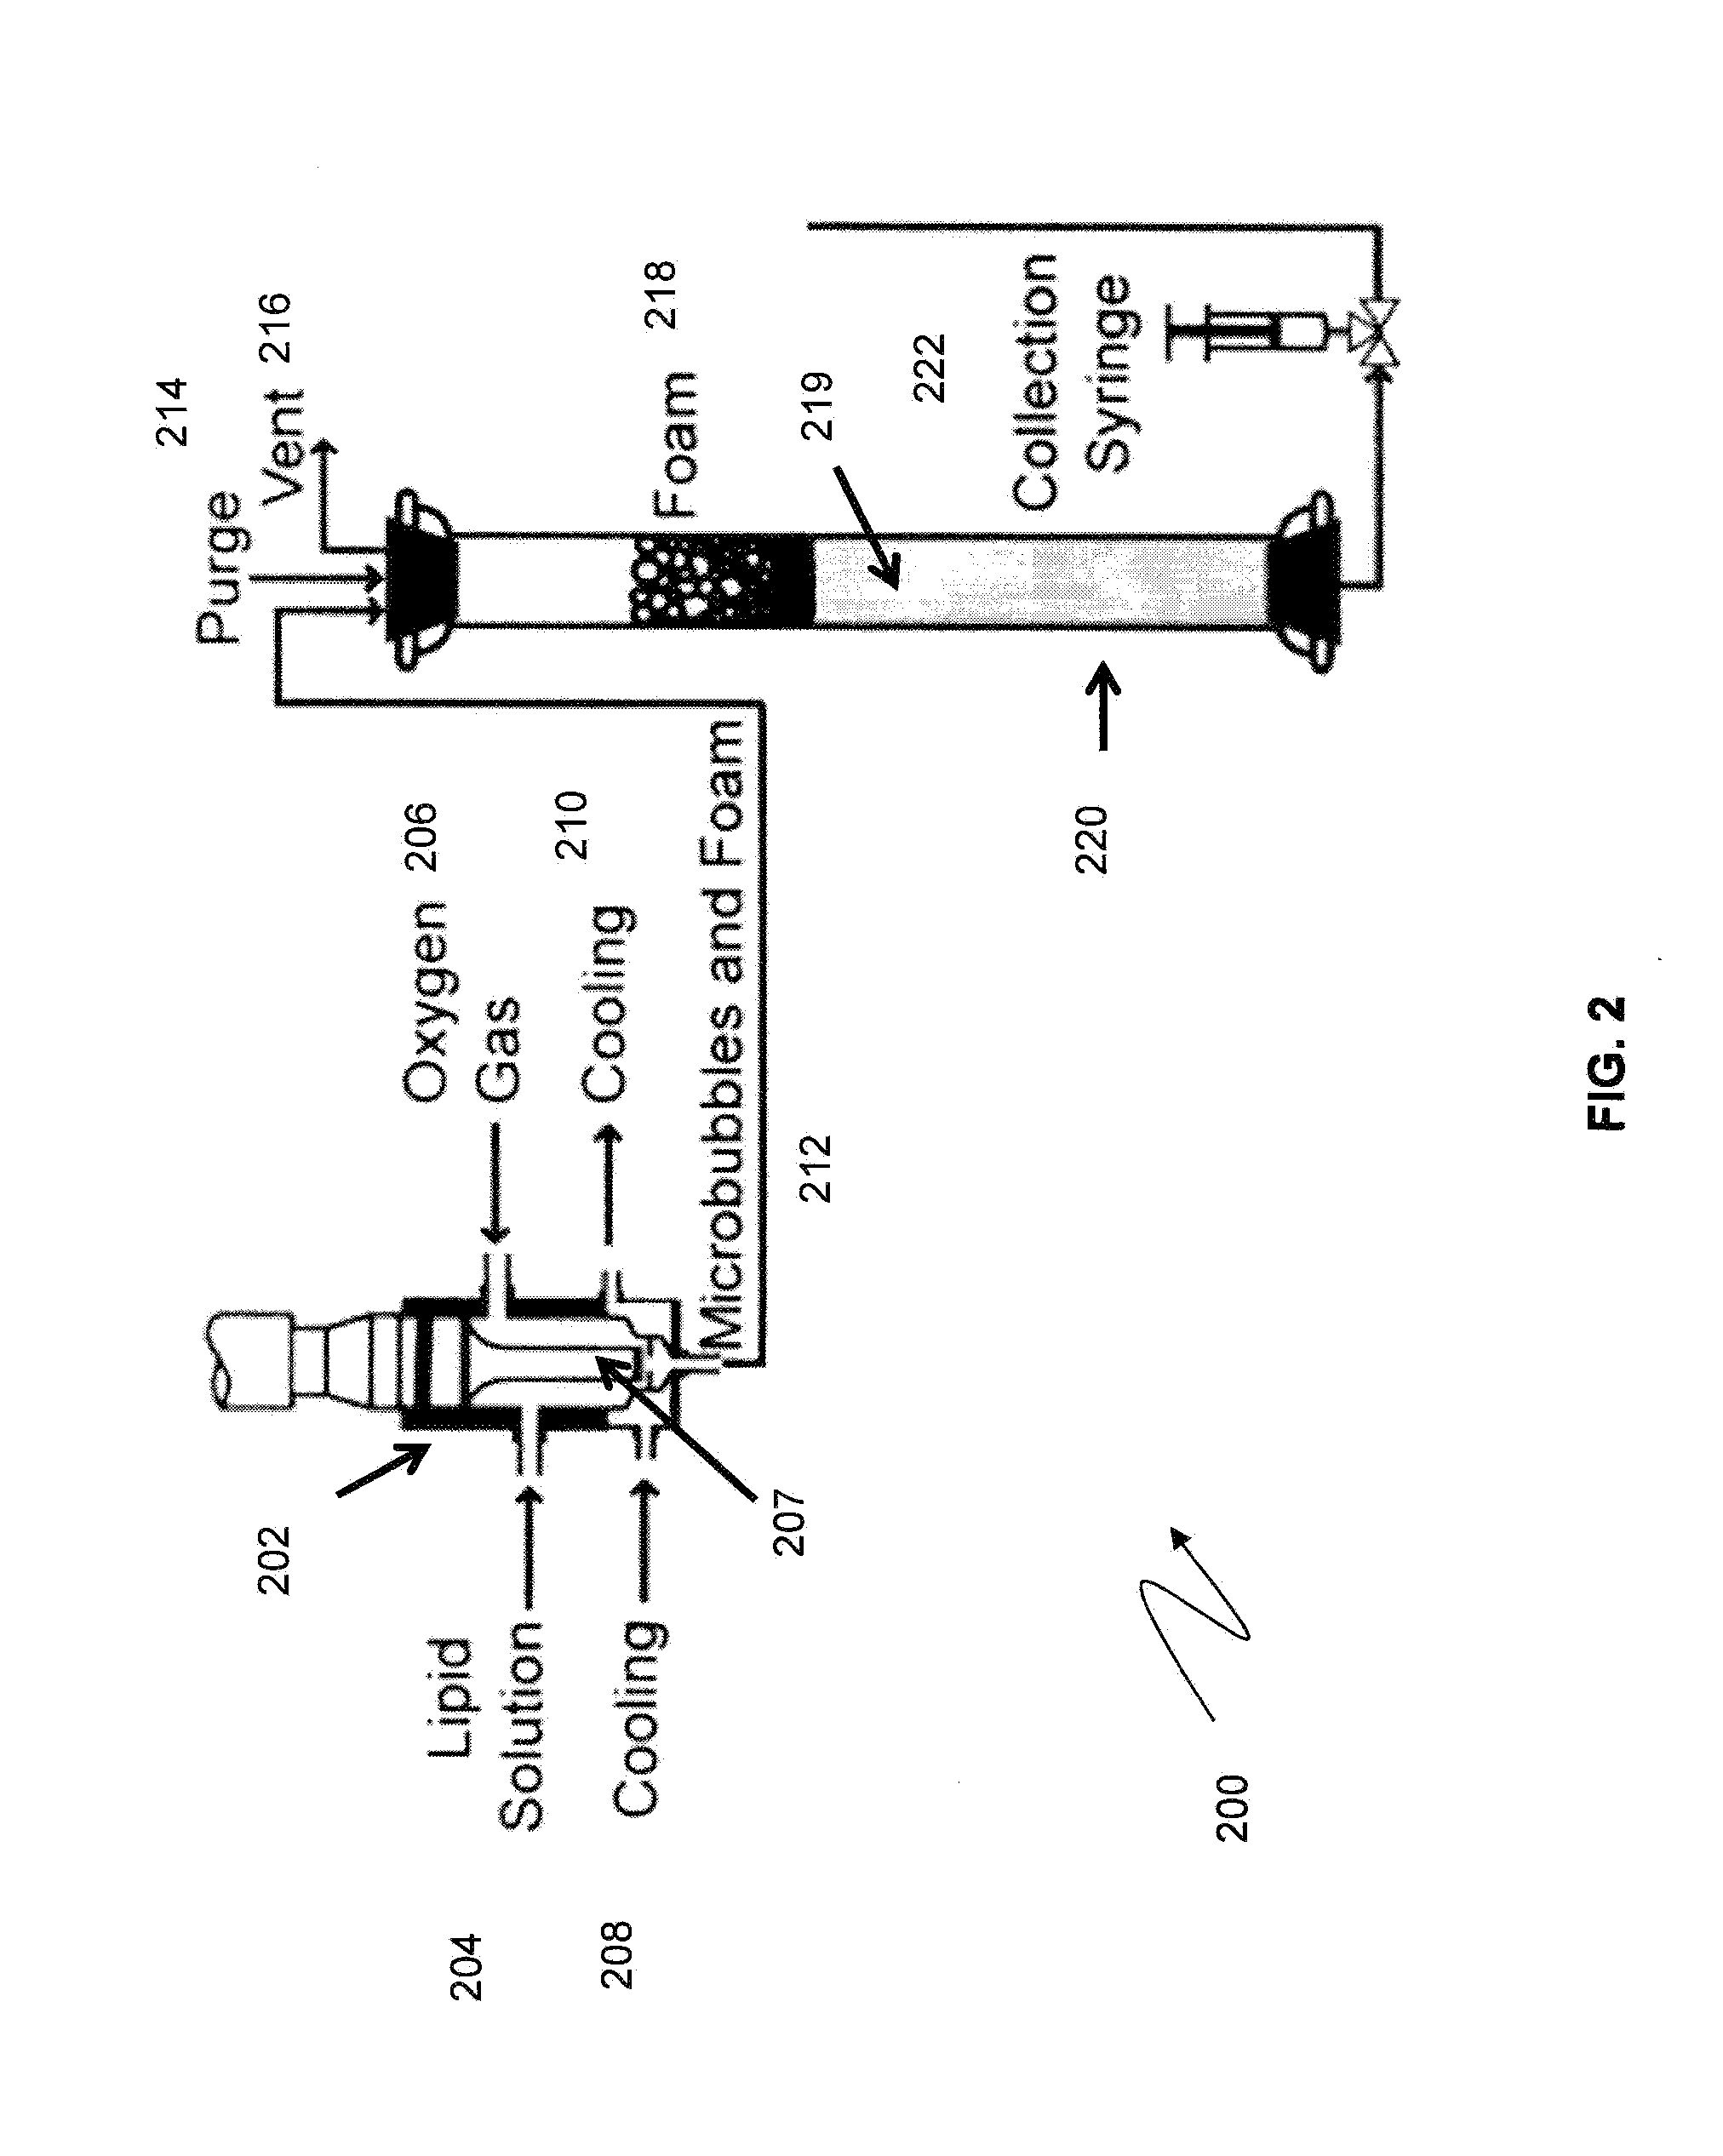 System and methods for ventilation through a body cavity